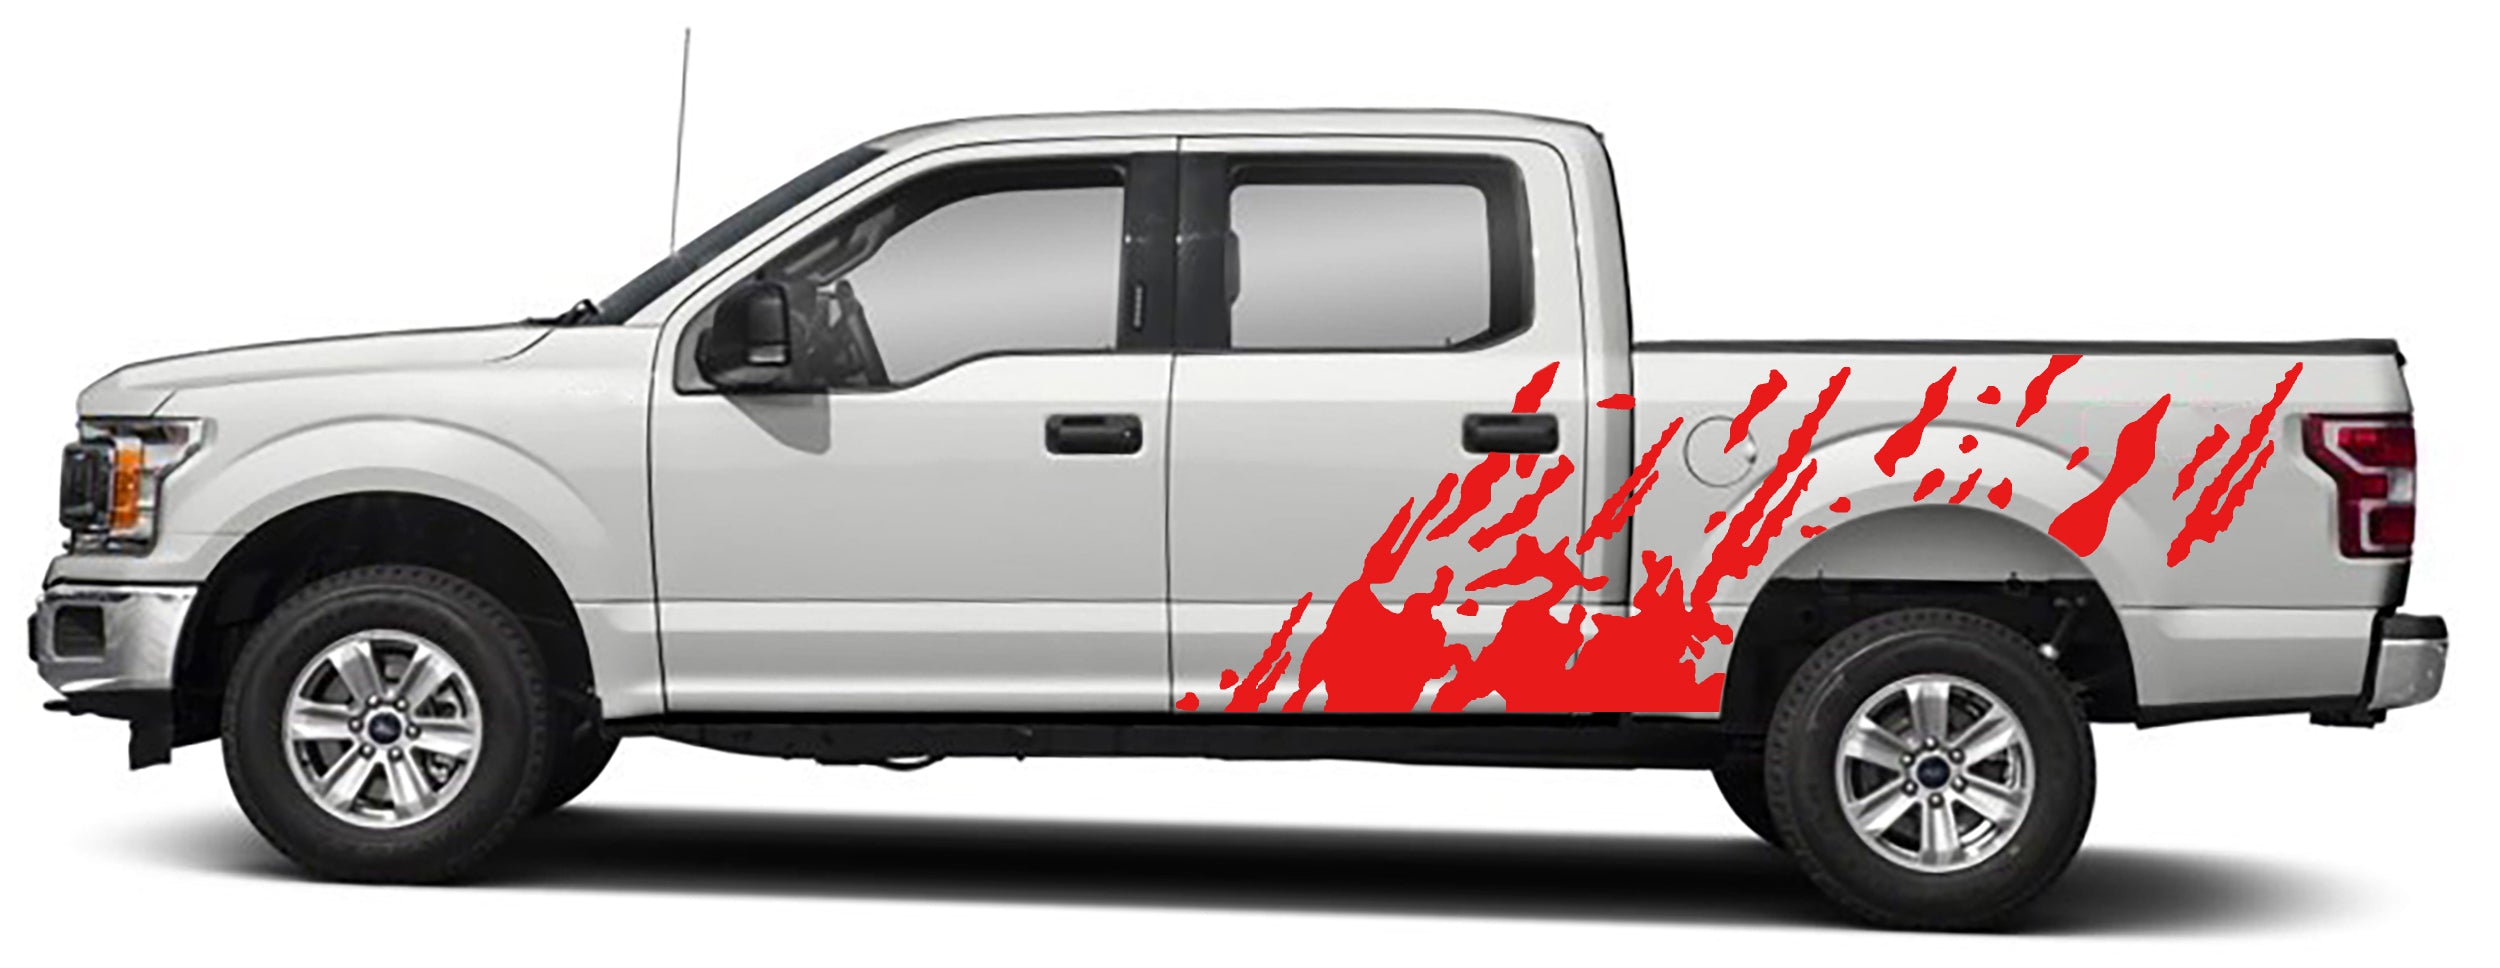 mud splash side graphics for ford f 150 2015 to 2020 models red